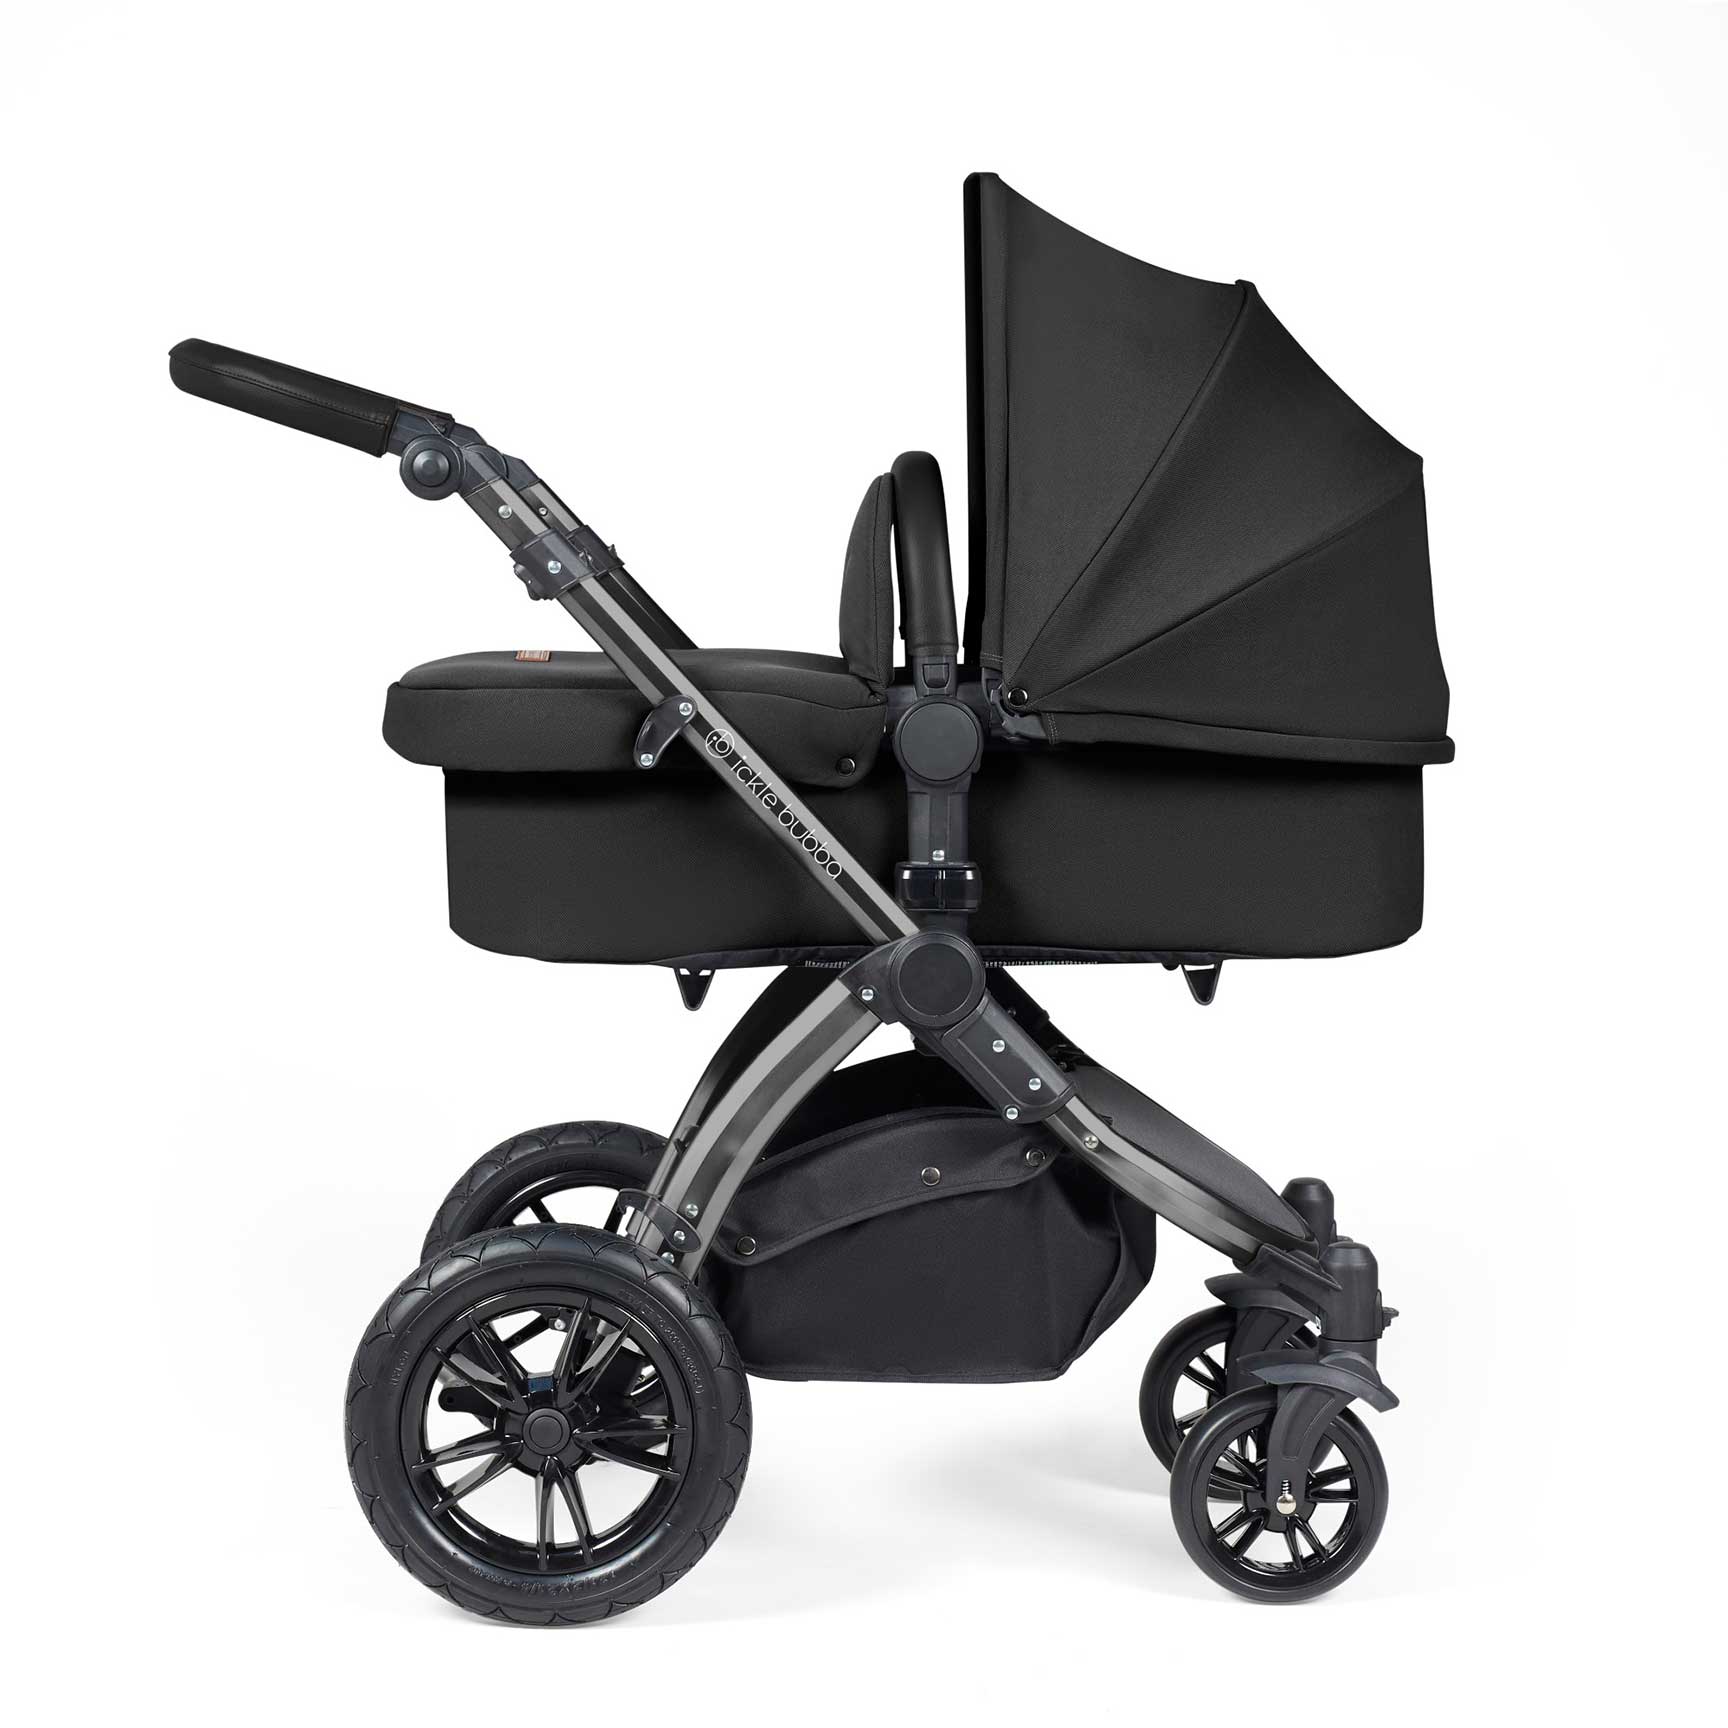 Ickle Bubba Stomp Luxe All-in-One Travel System with Isofix Base in Black/Midnight/Black Travel Systems 10-011-300-202 5056515026436